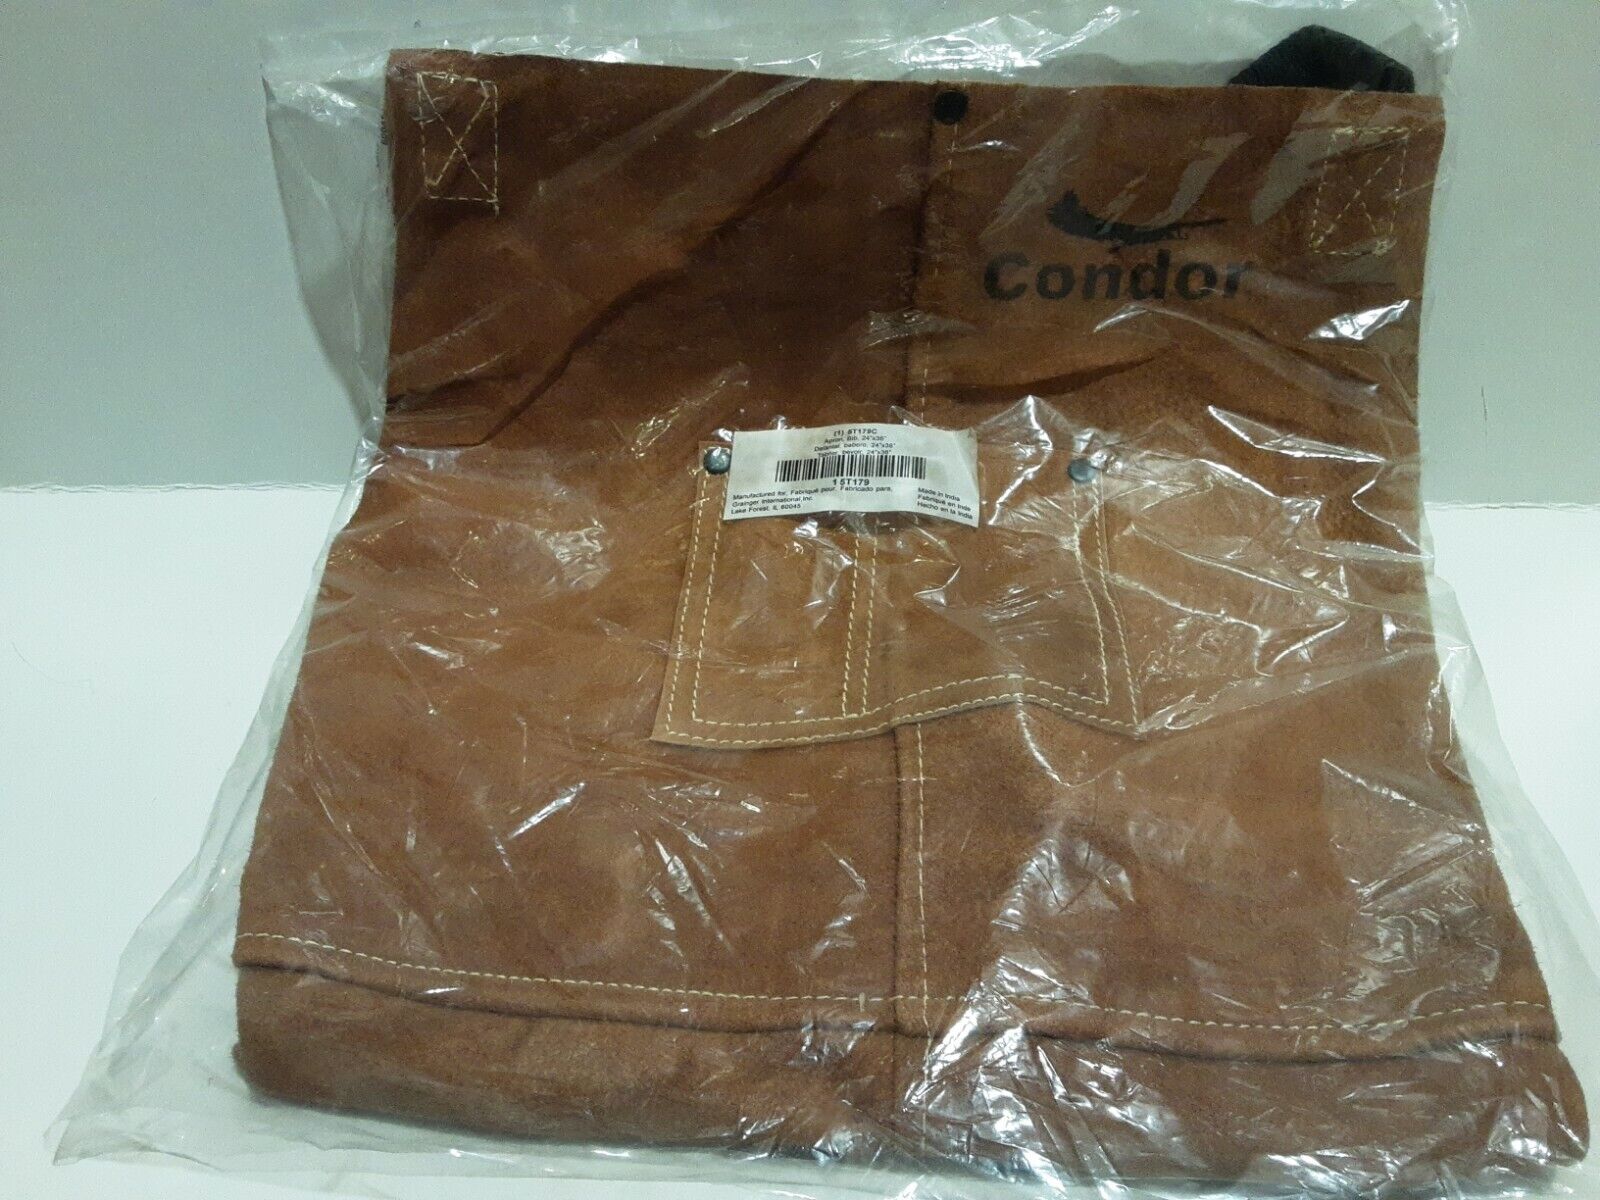 New Condor 5t179 Welding Bib Apron Leather 36 X 24 In With Pocket